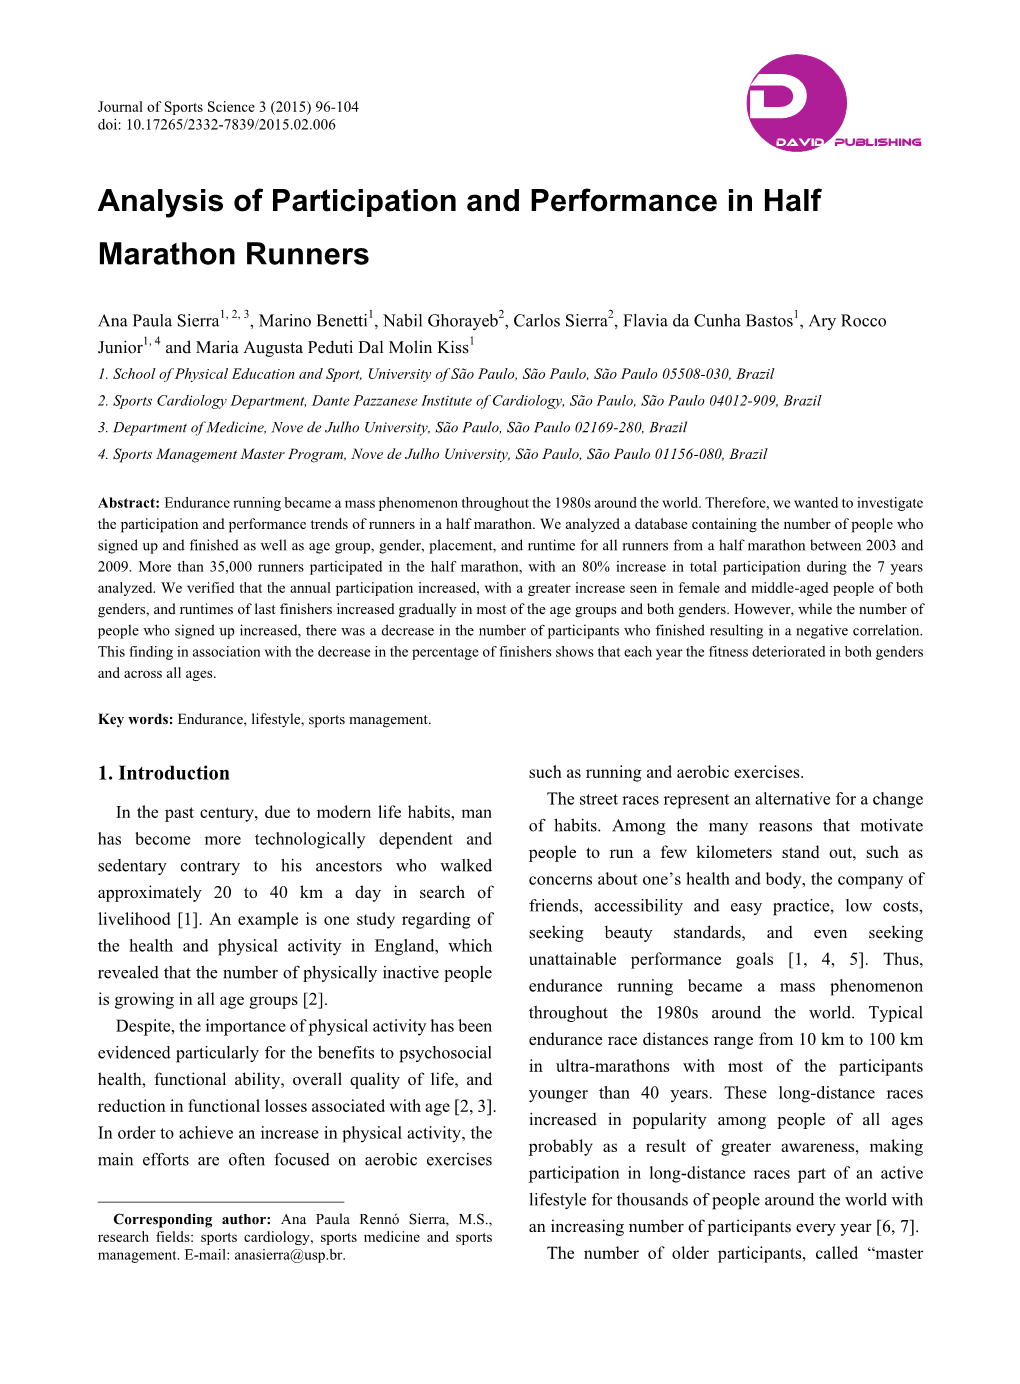 Analysis of Participation and Performance in Half Marathon Runners